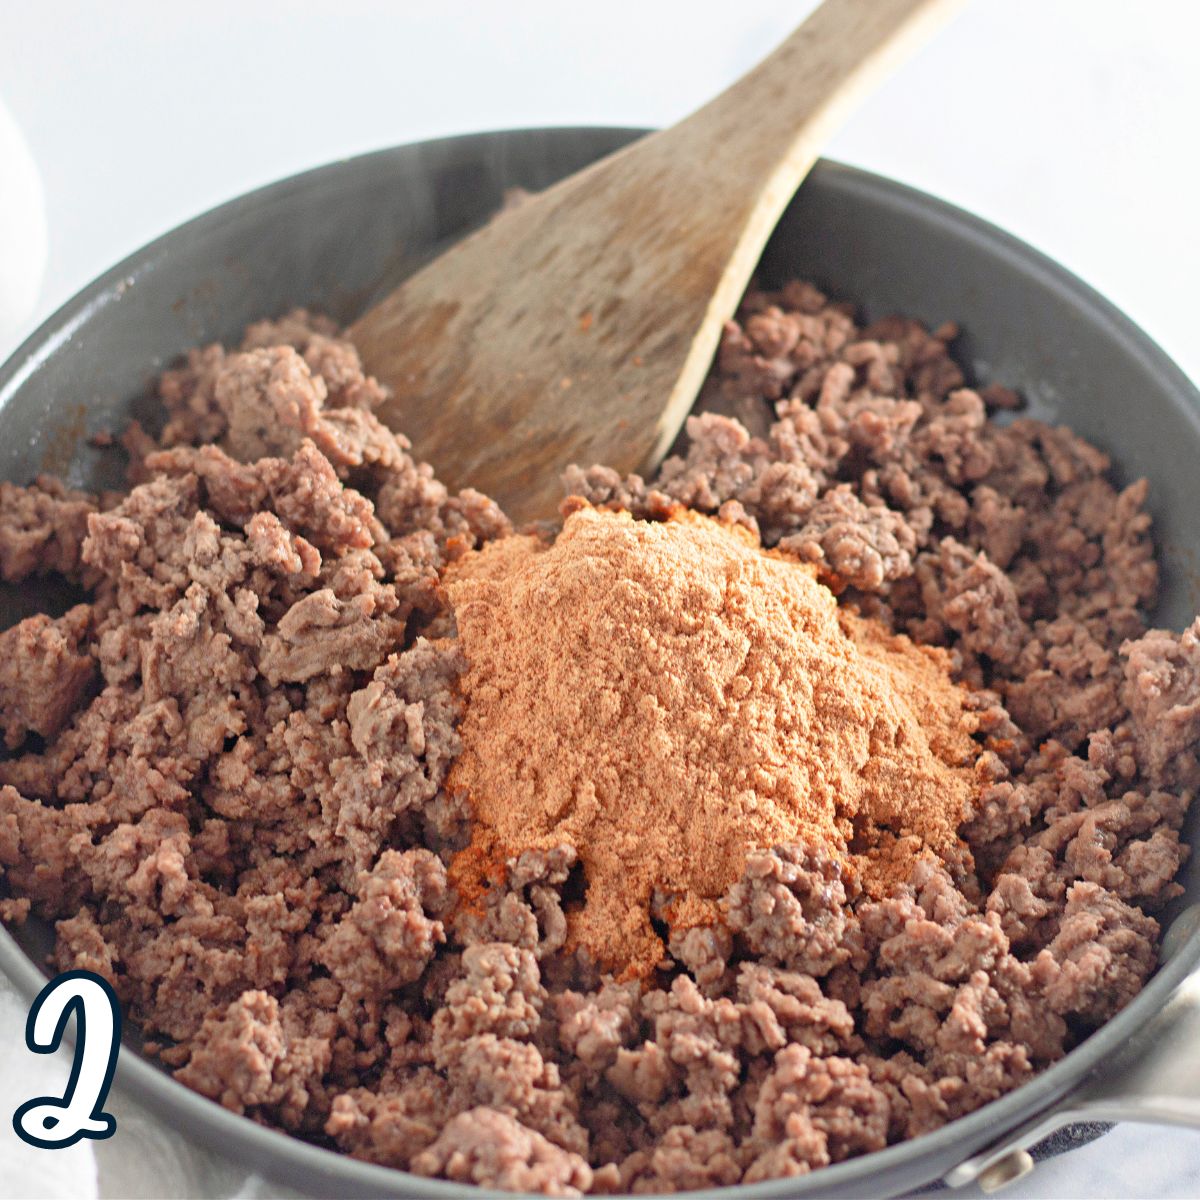 Ground beef and taco seasoning in a pan with a wooden spoon.